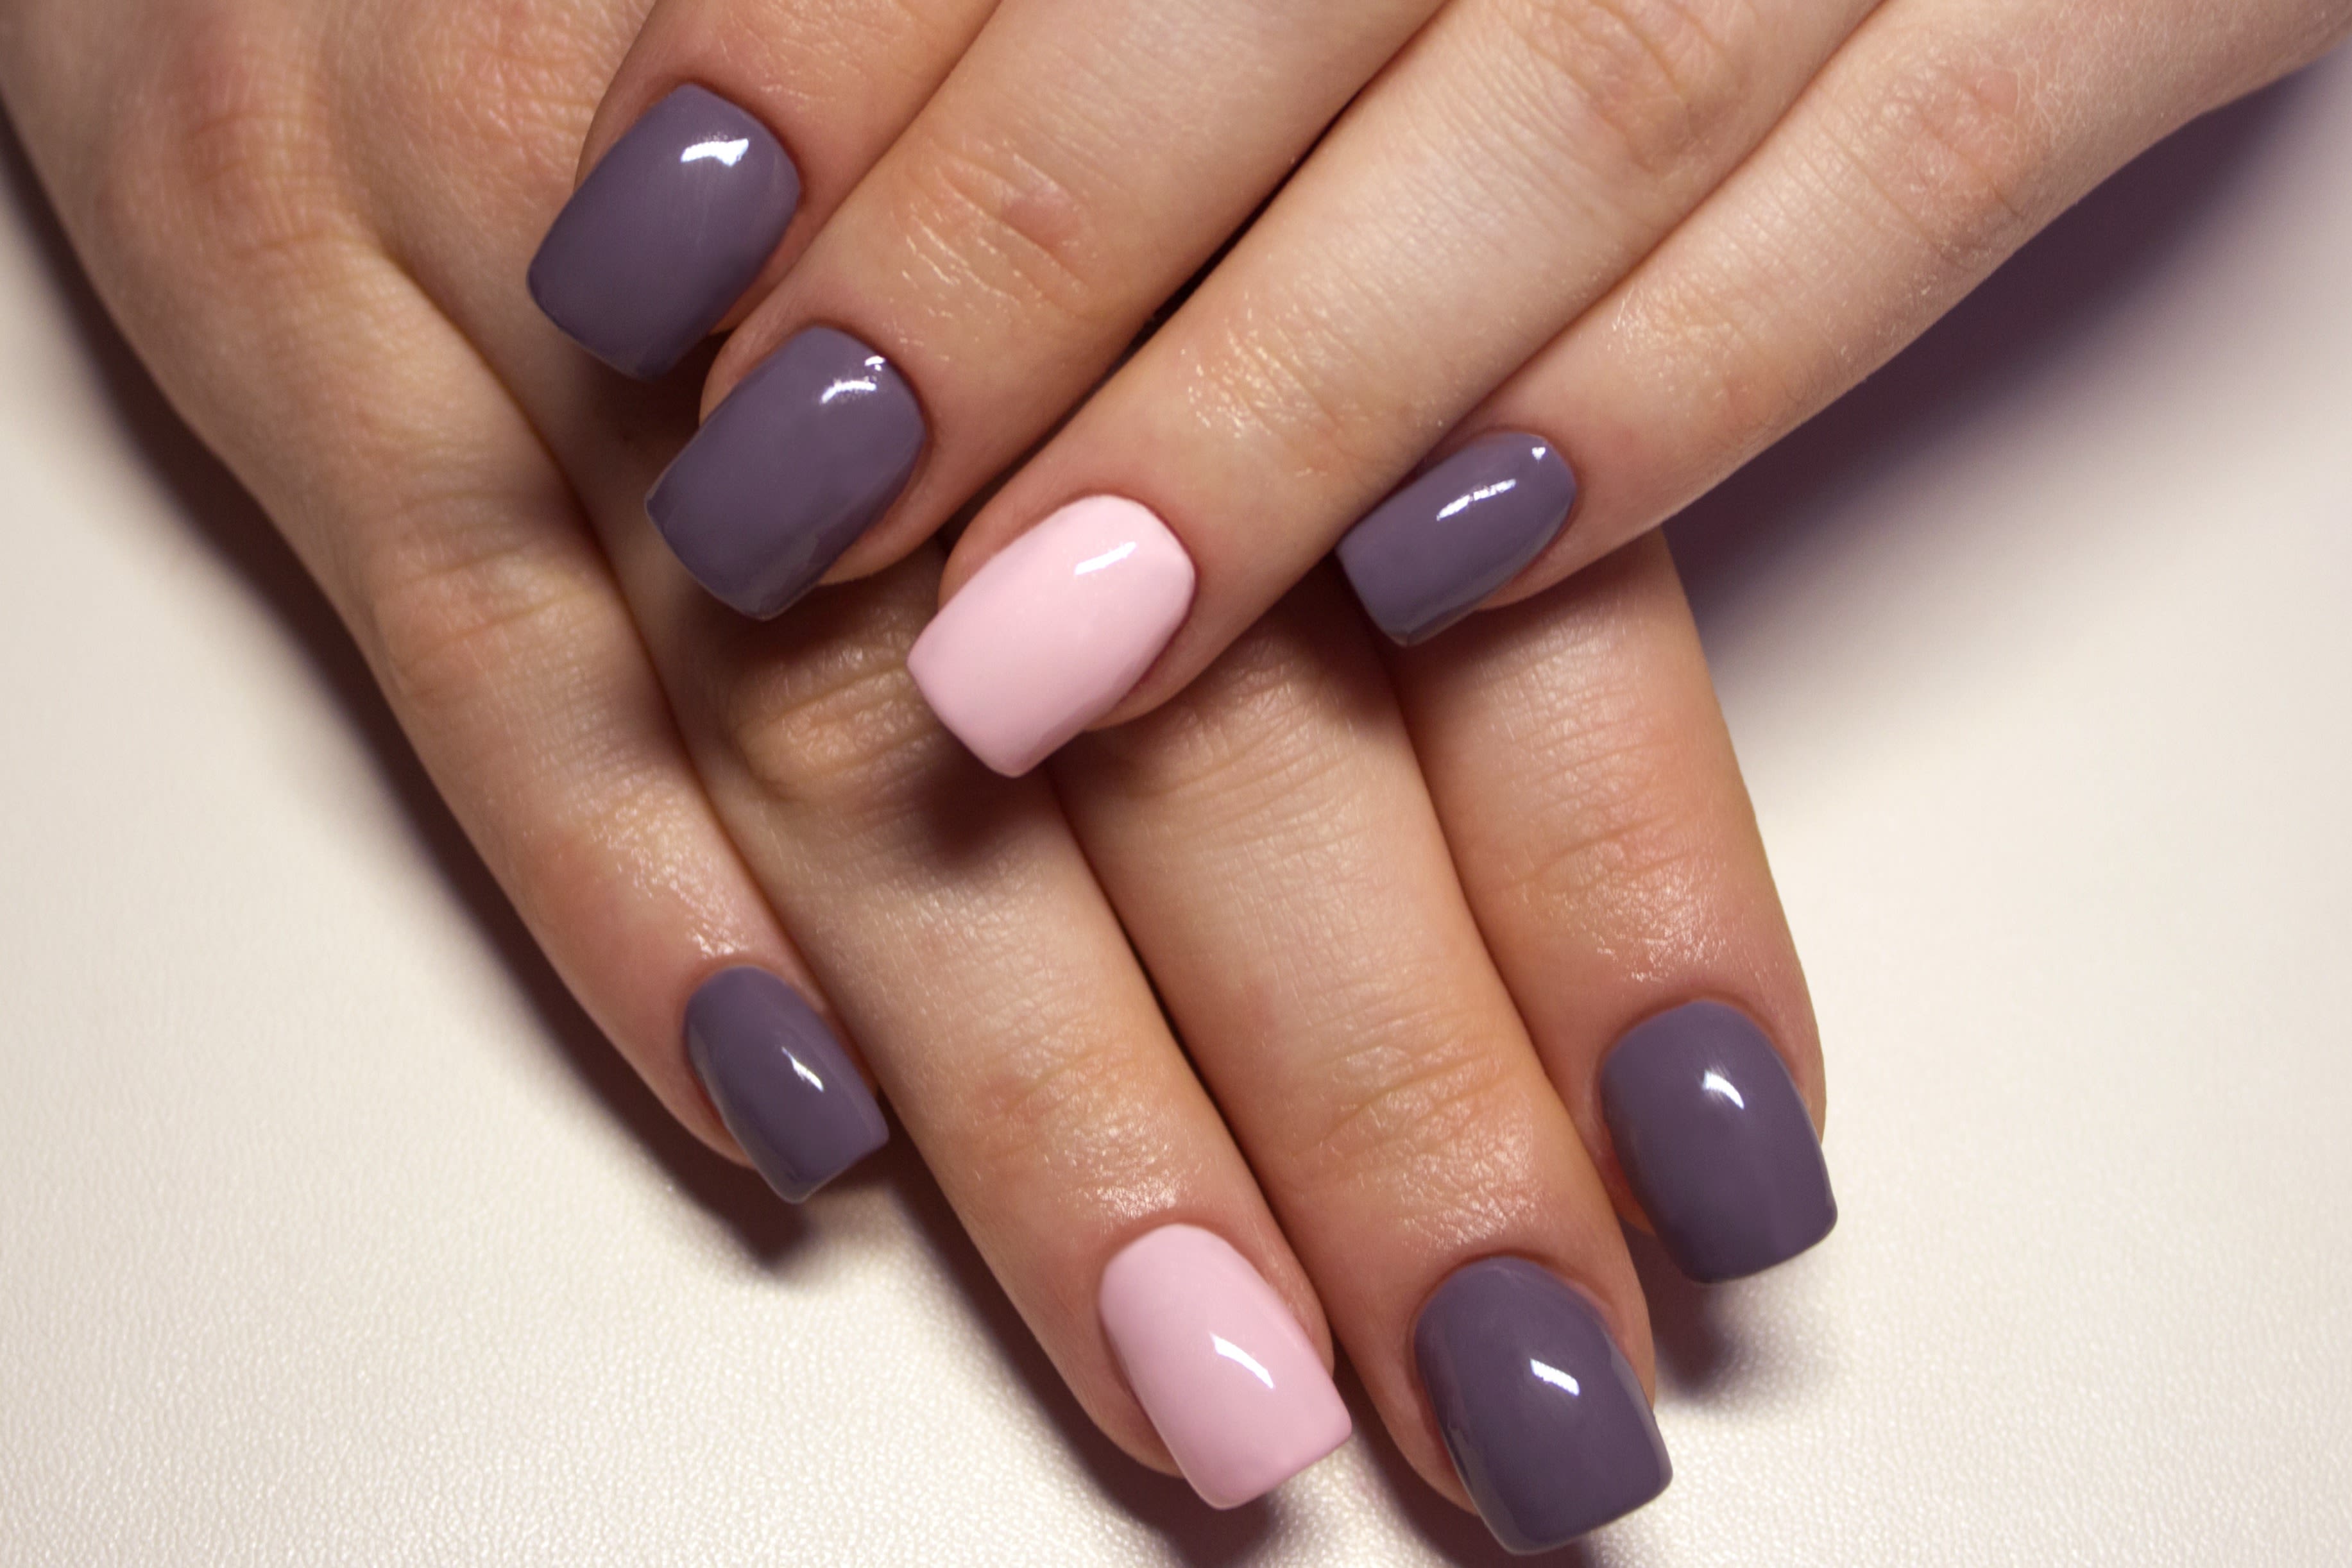 What Does It Mean if a Girl Has Blue Nails? – ORLY